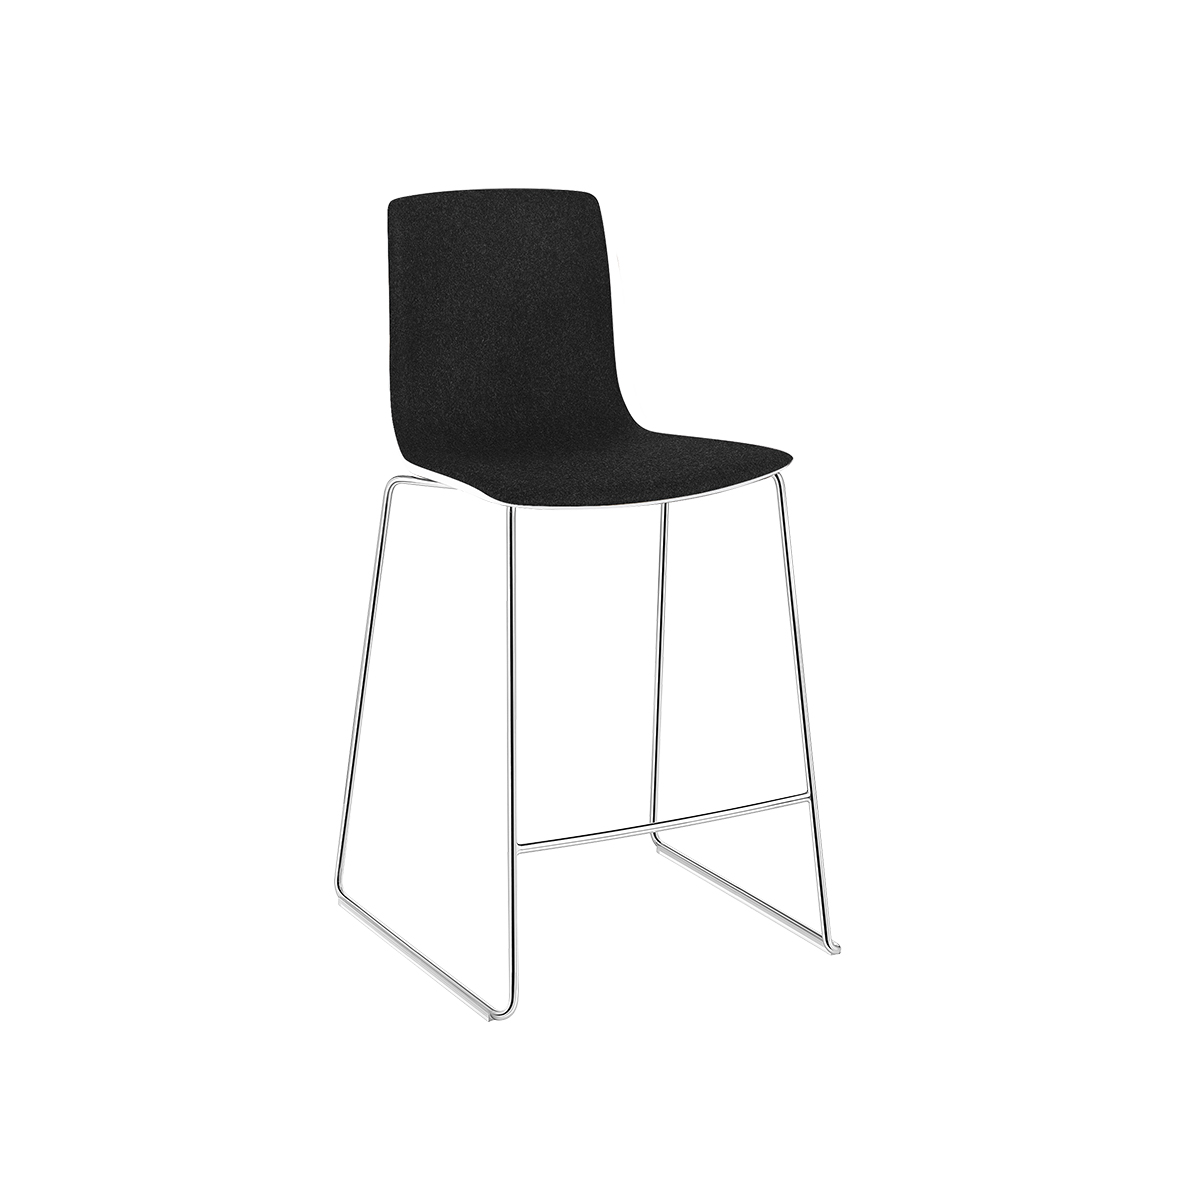 Aava 3960 chair by Arper